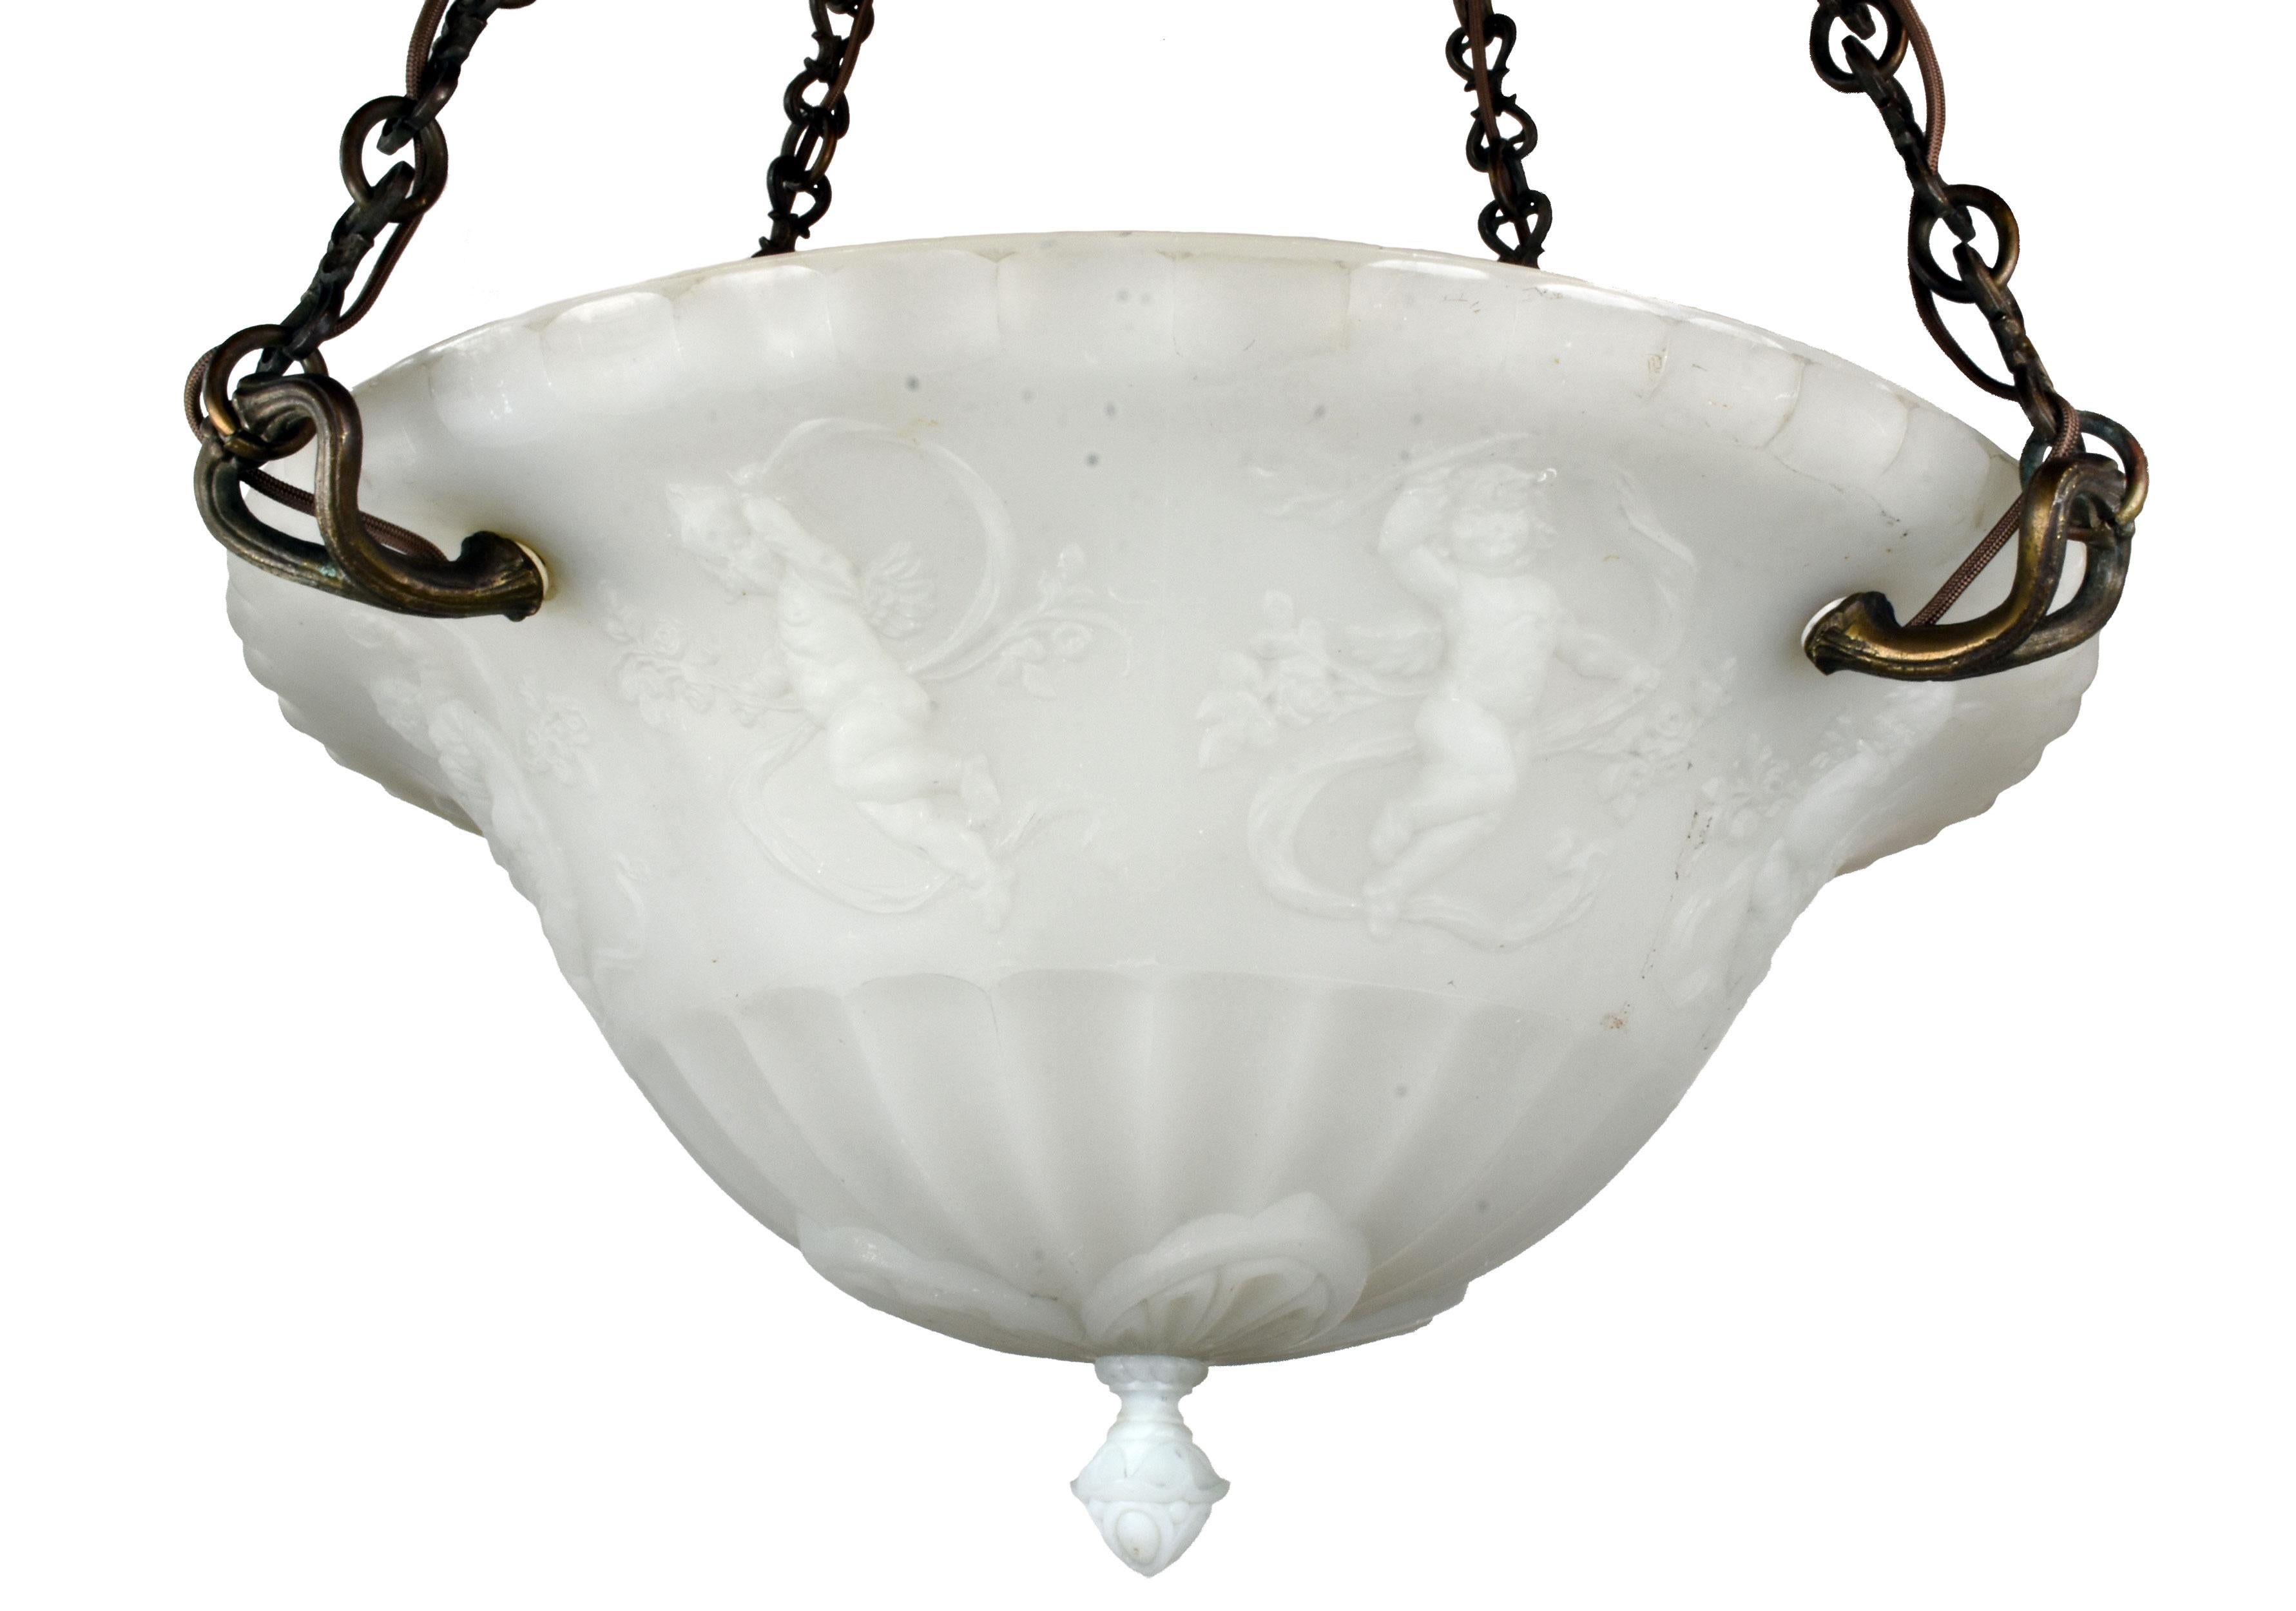 This impressive and gorgeous chandelier is adorned with dancing putti designs that bestow it with a unique playful spirit. When illuminated, the entirely cast glass bowl gives off a pleasantly warm radiance which even further showcases the